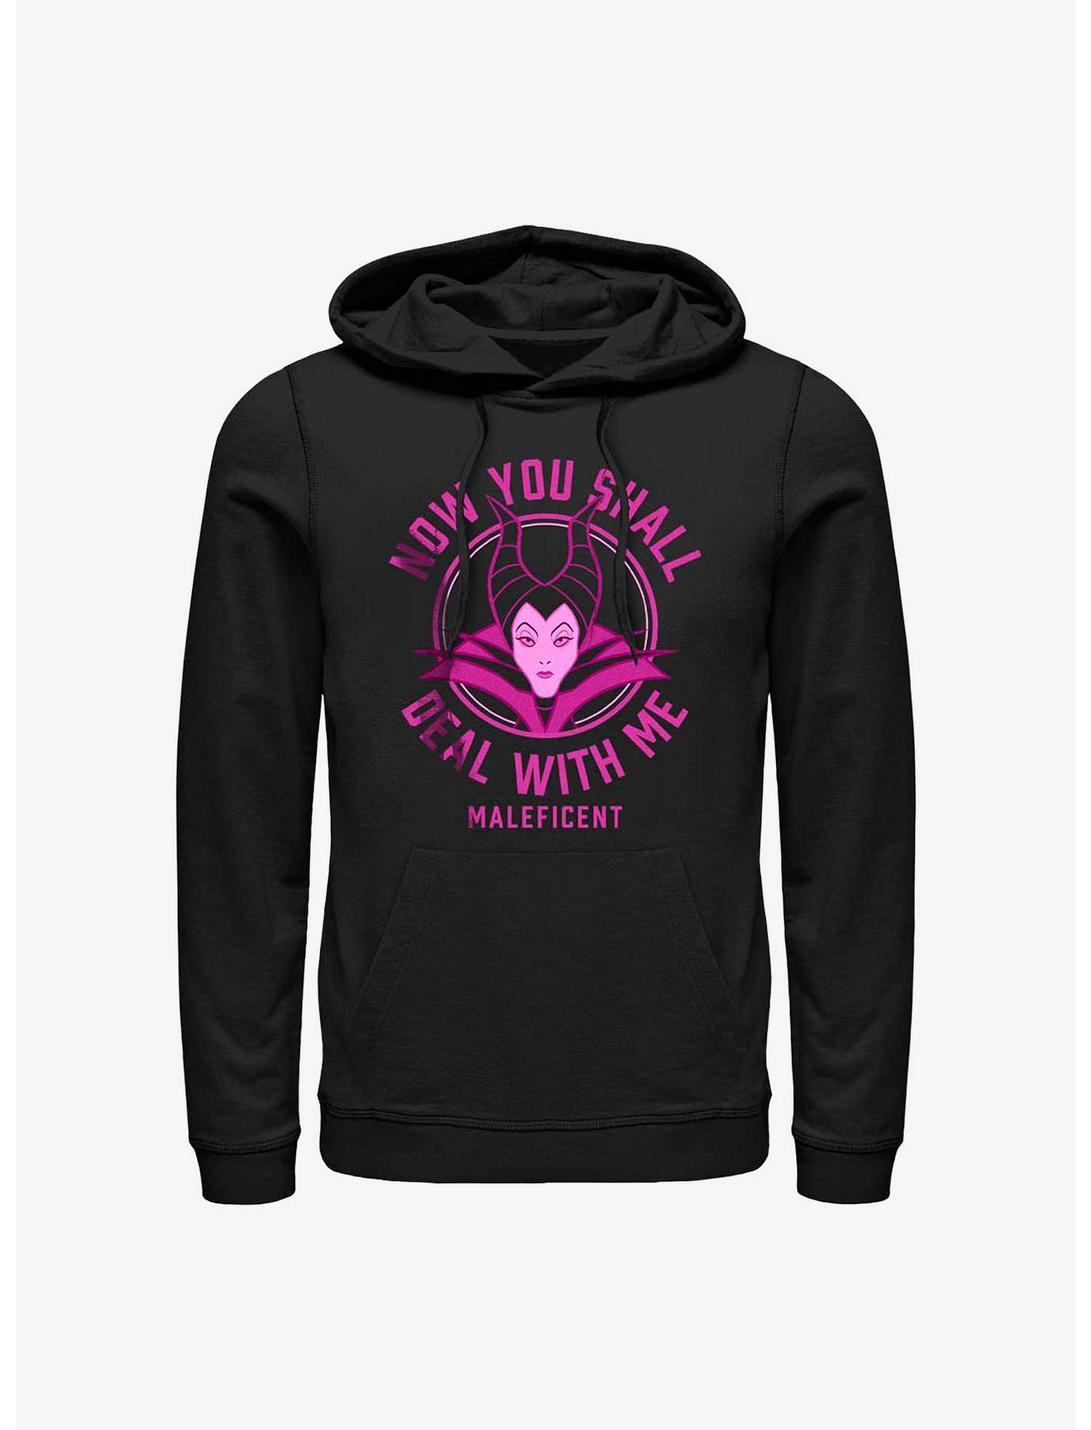 Disney Villains Now You Should Deal With Me Maleficent Hoodie, BLACK, hi-res